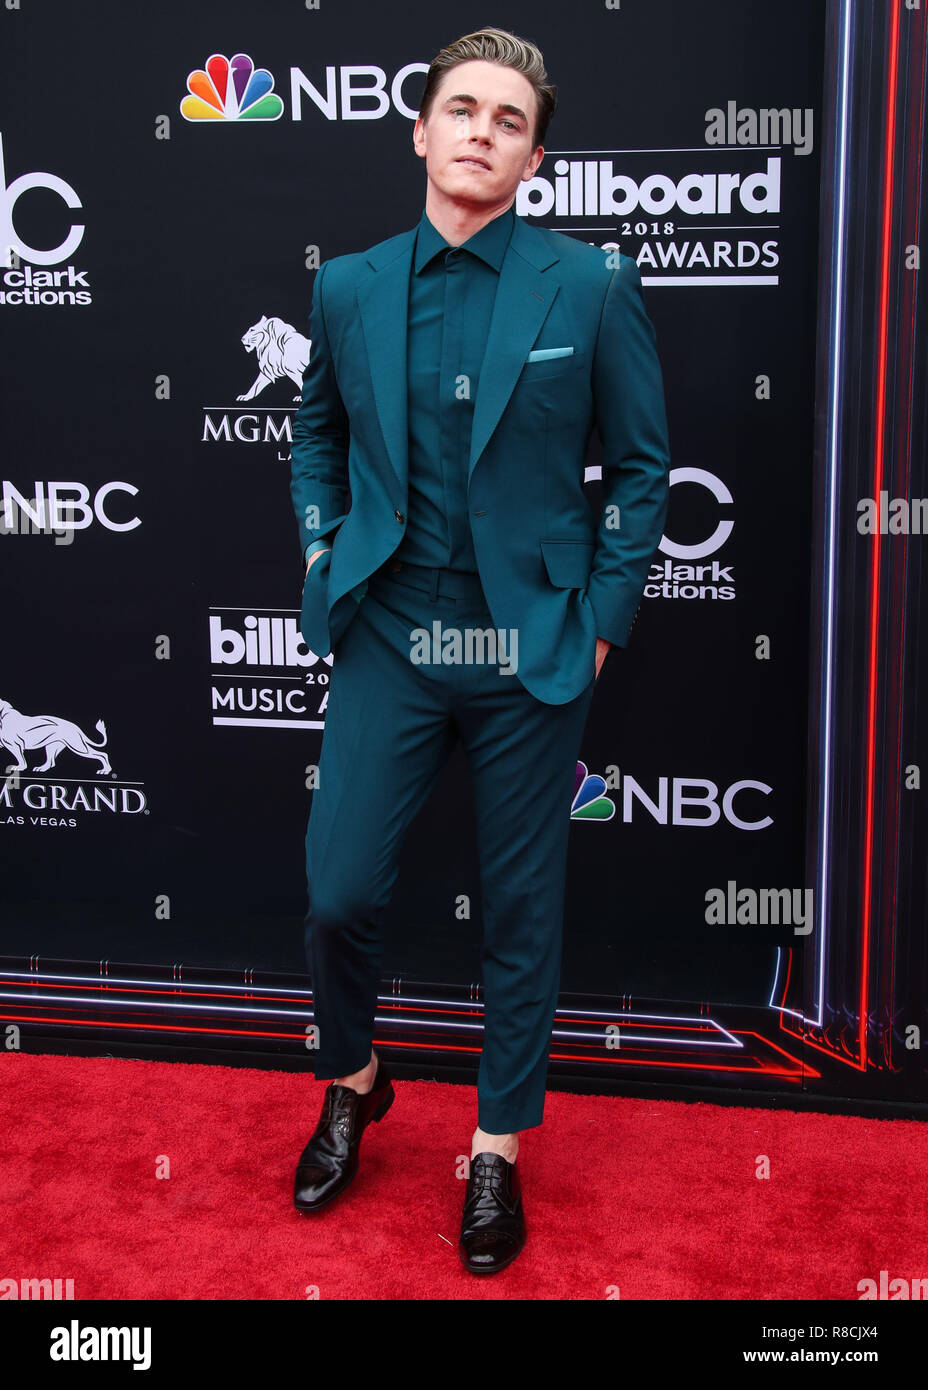 LAS VEGAS, NV, USA - MAY 20: Jesse McCartney at the 2018 Billboard Music Awards held at the MGM Grand Garden Arena on May 20, 2018 in Las Vegas, Nevada, United States. (Photo by Xavier Collin/Image Press Agency) Stock Photo